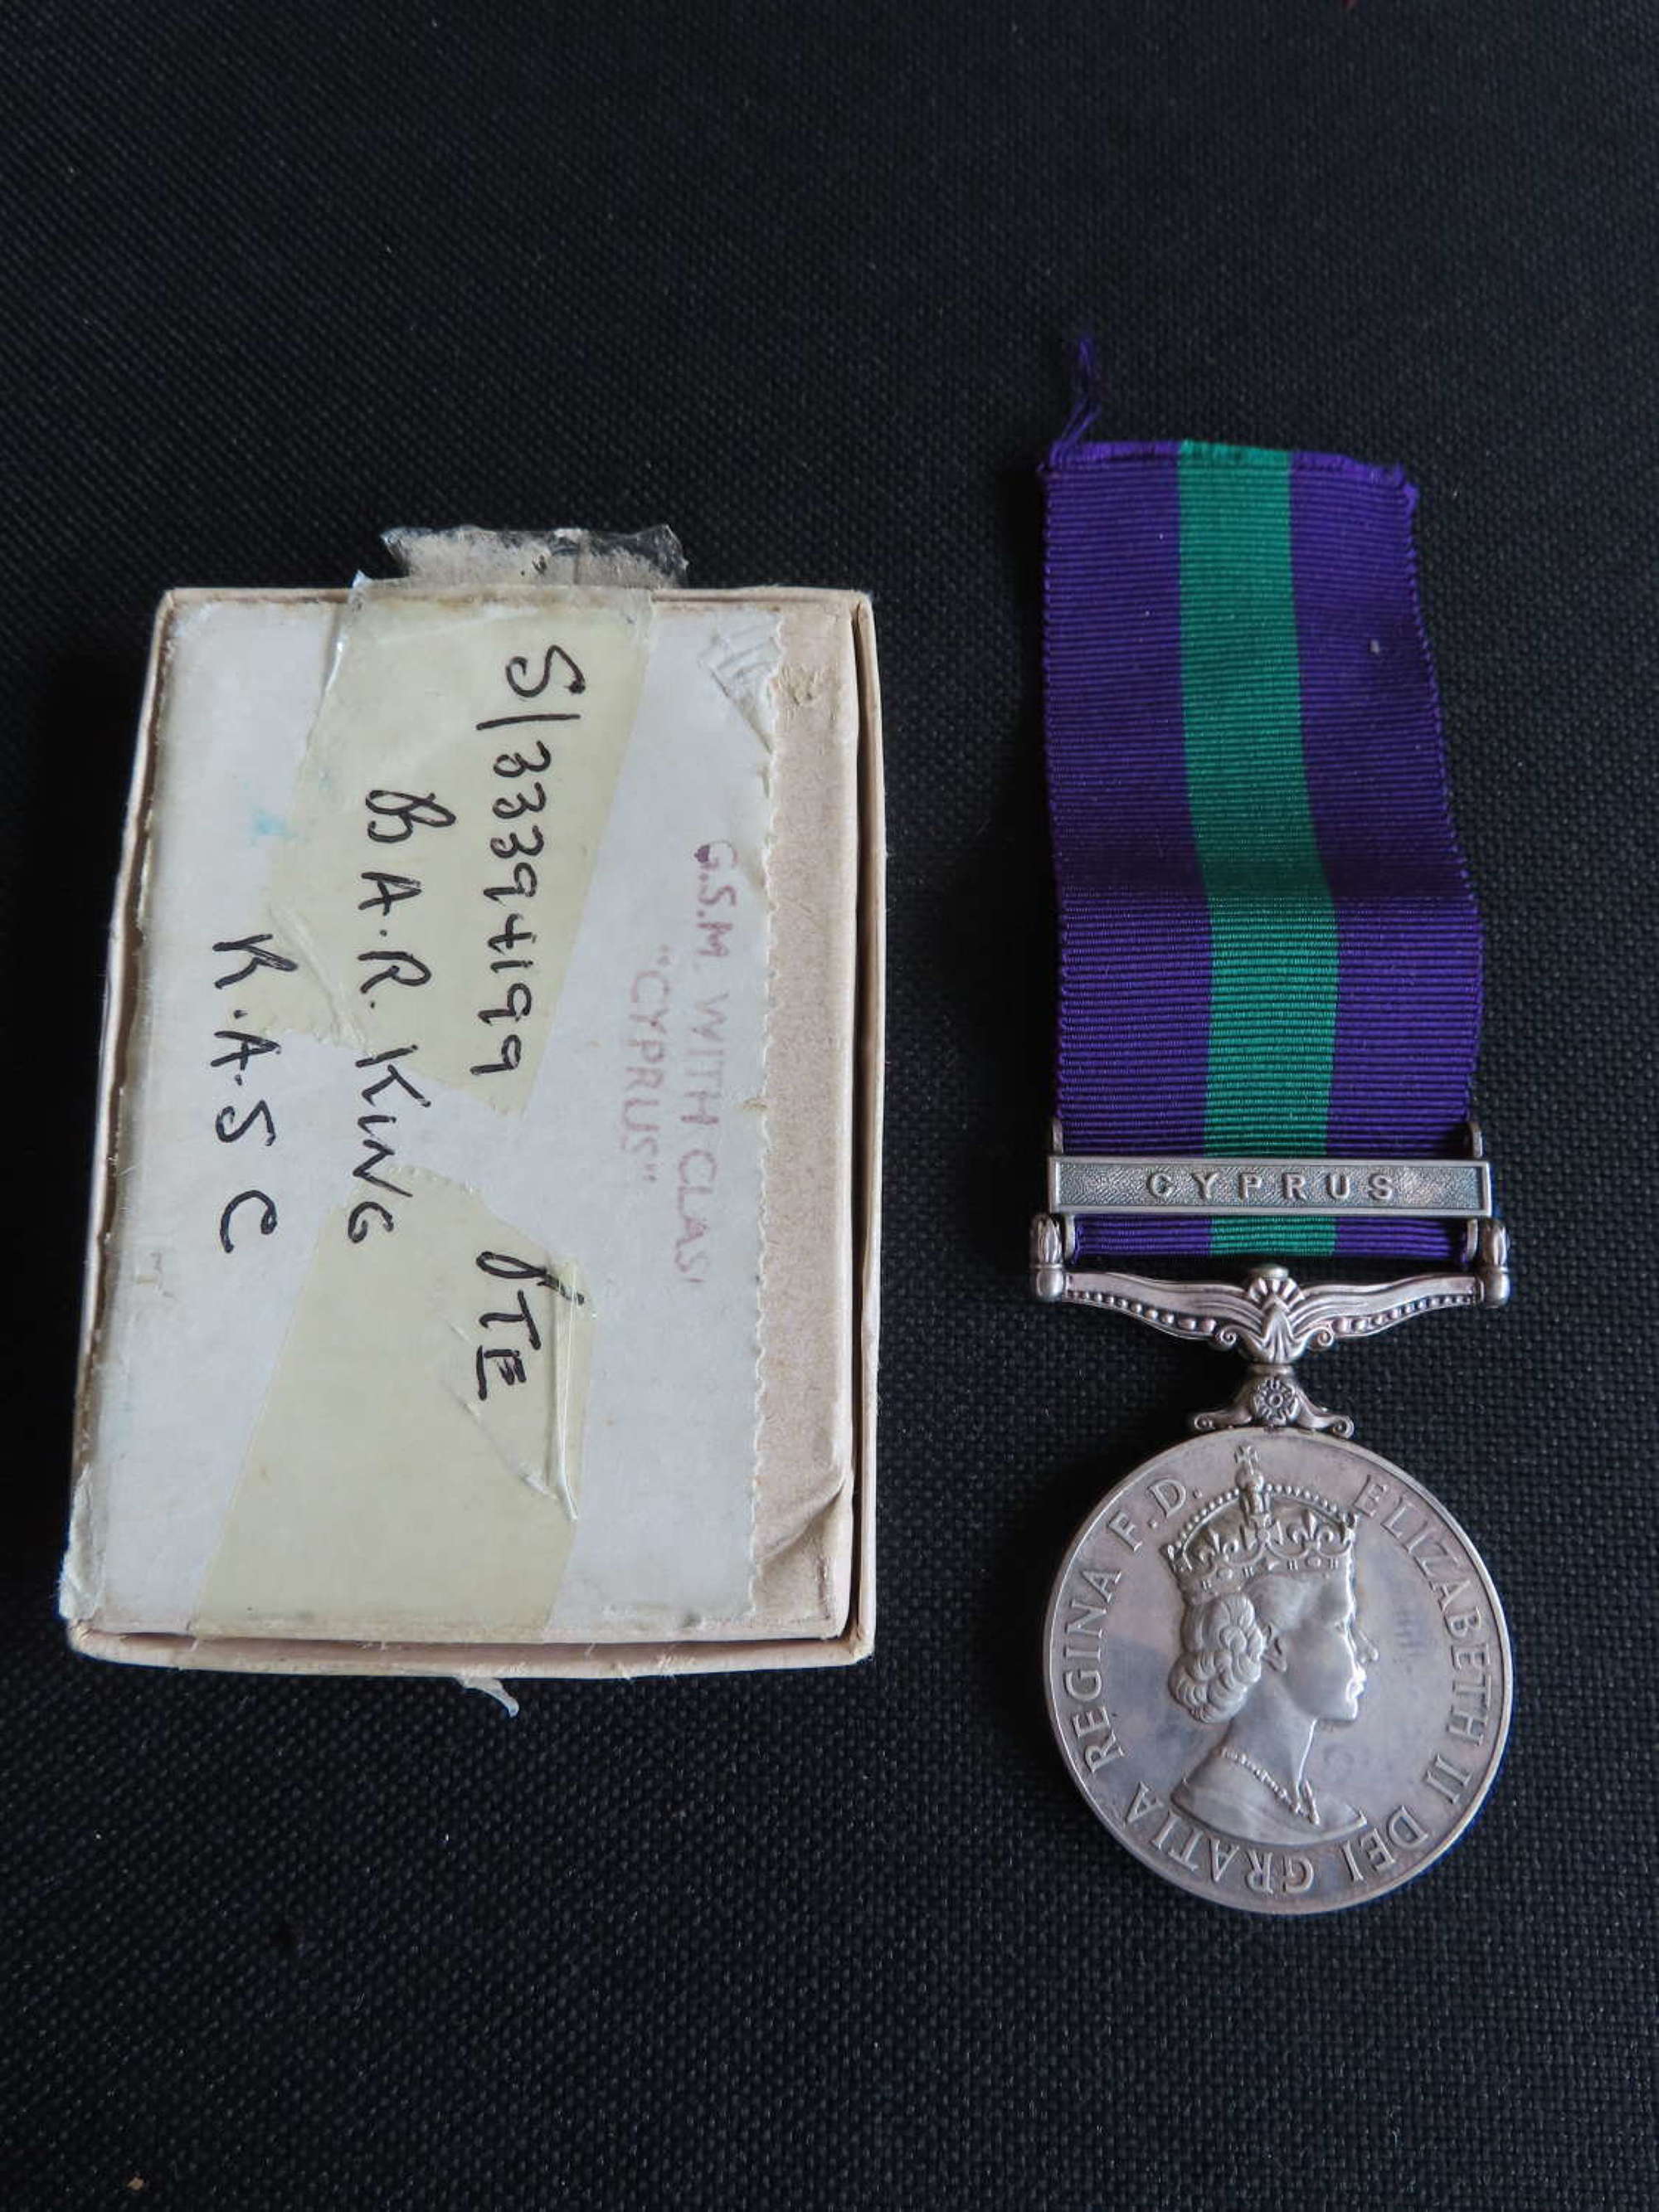 Cyprus general service medal awarded to Pte King R.A.S.C.